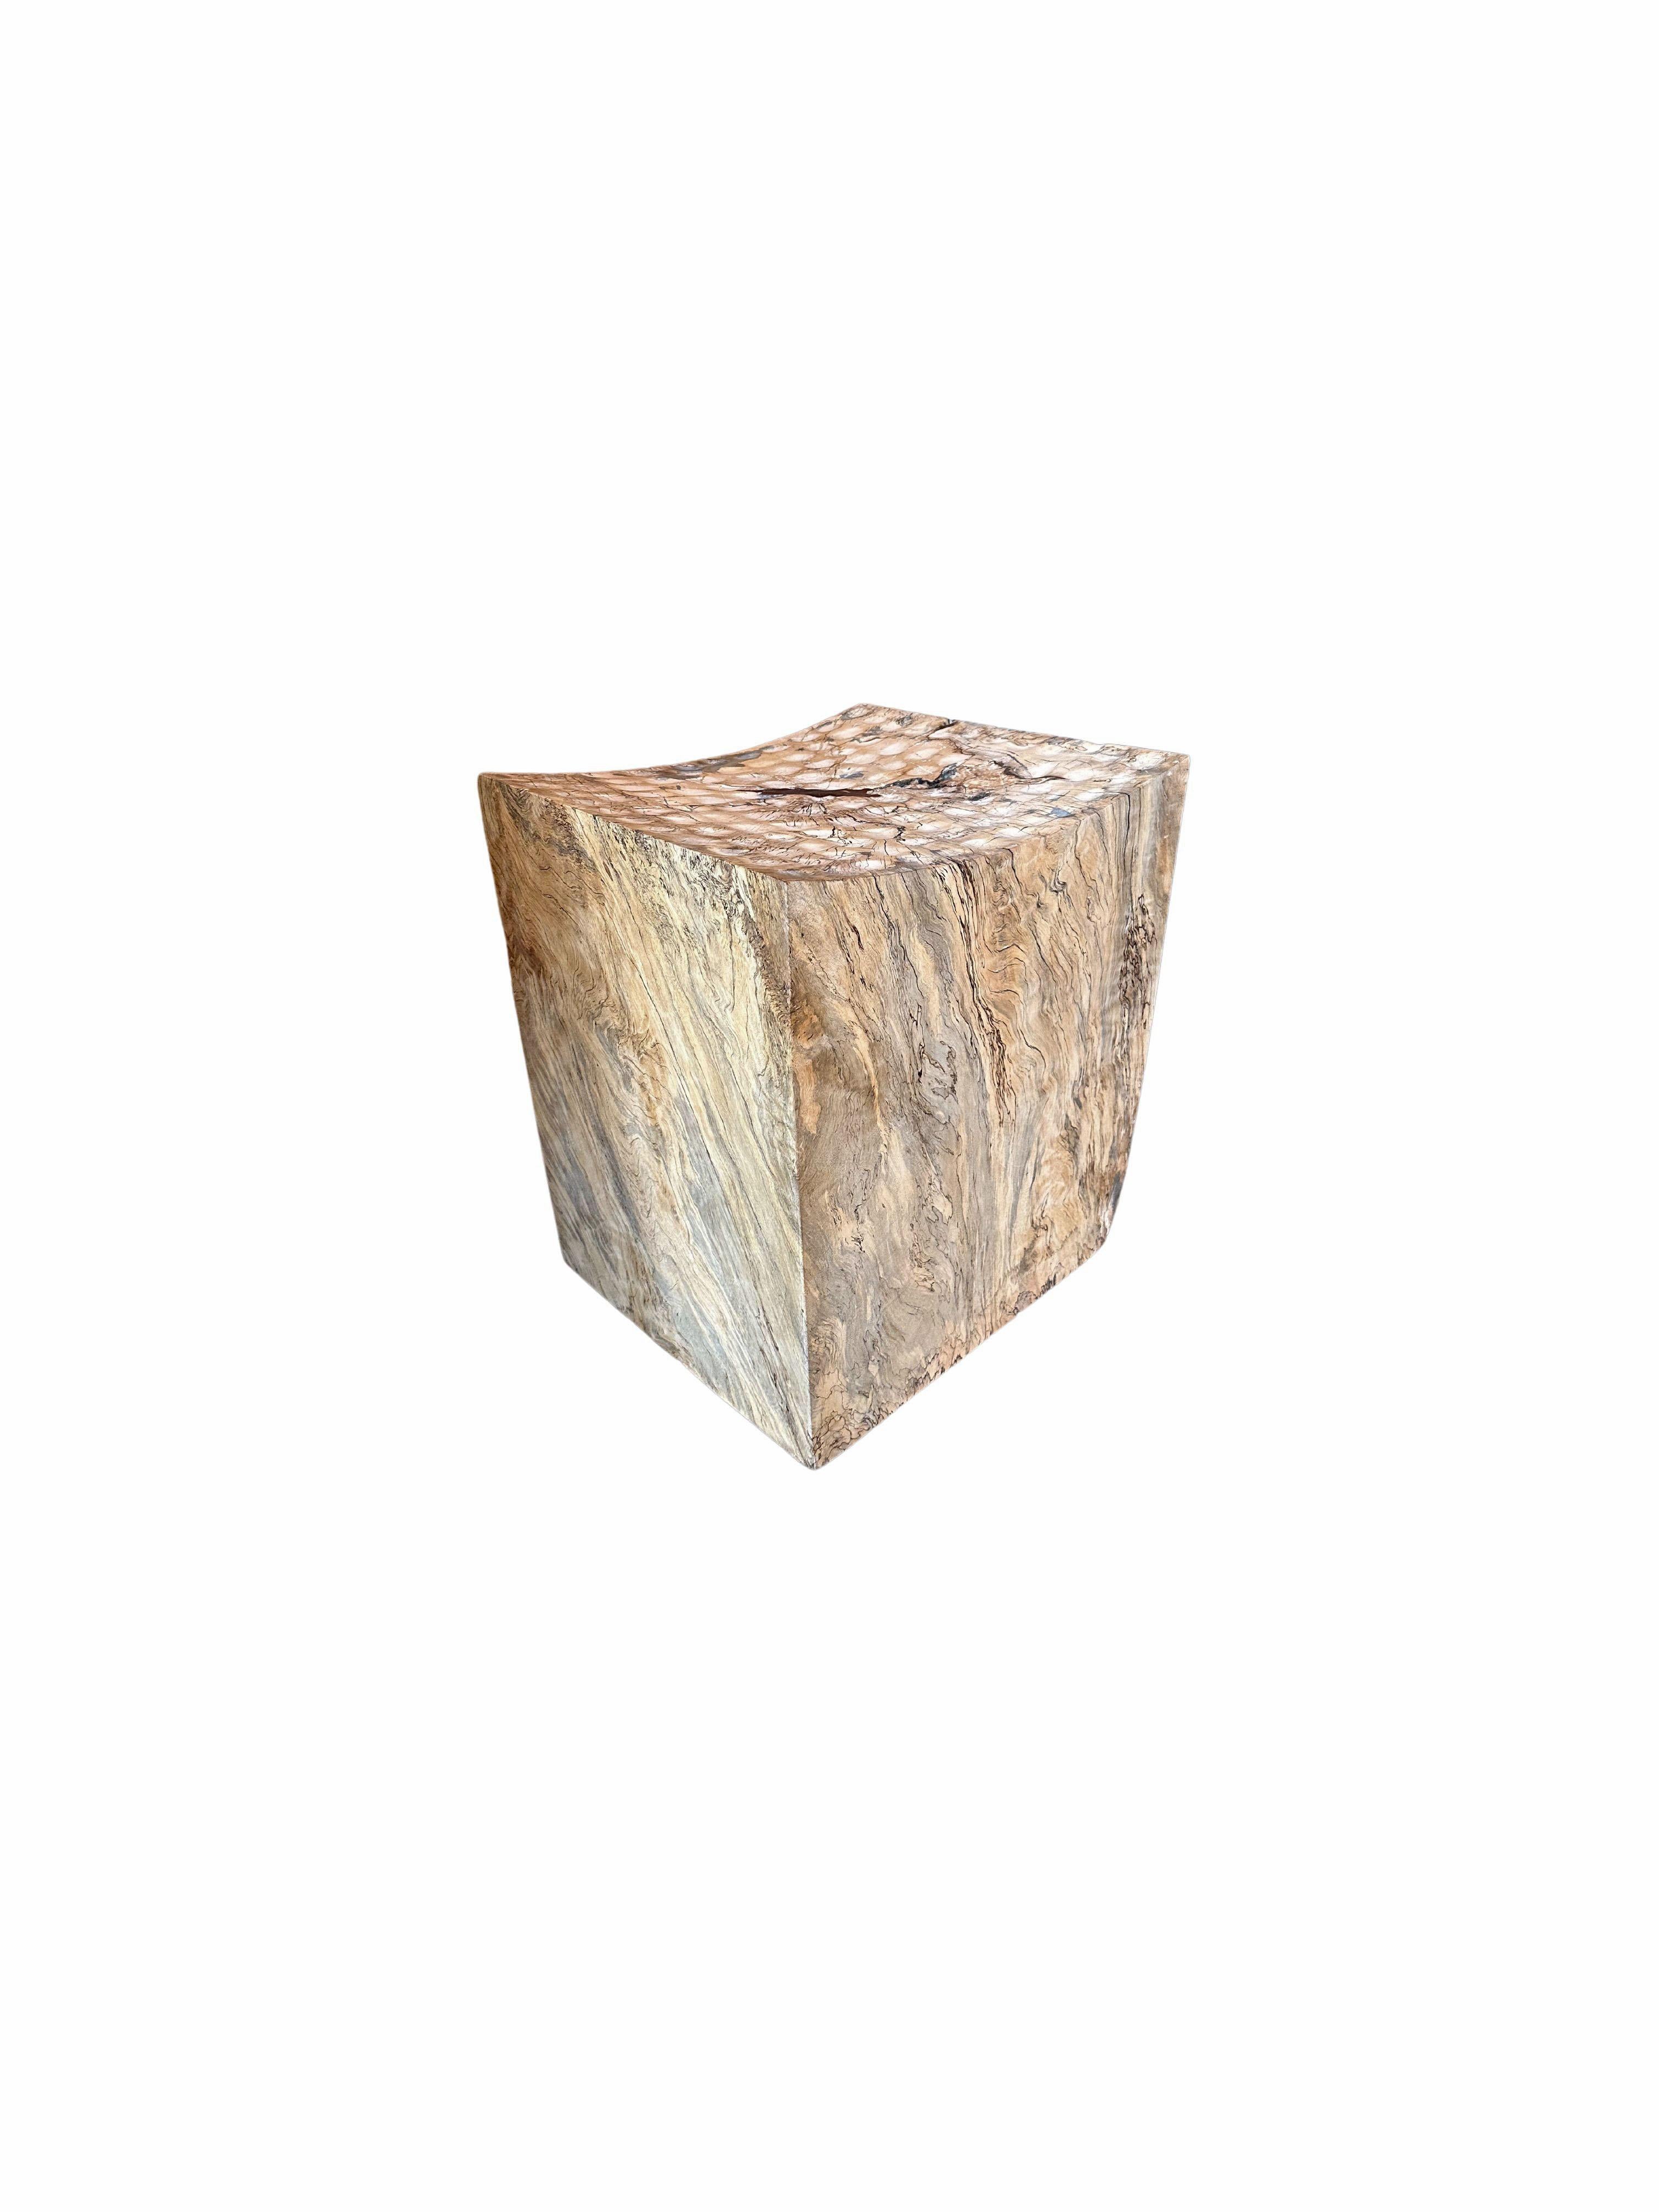 Organic Modern Sculptural Stool Carved from Solid Tamarind Wood Modern Organic For Sale